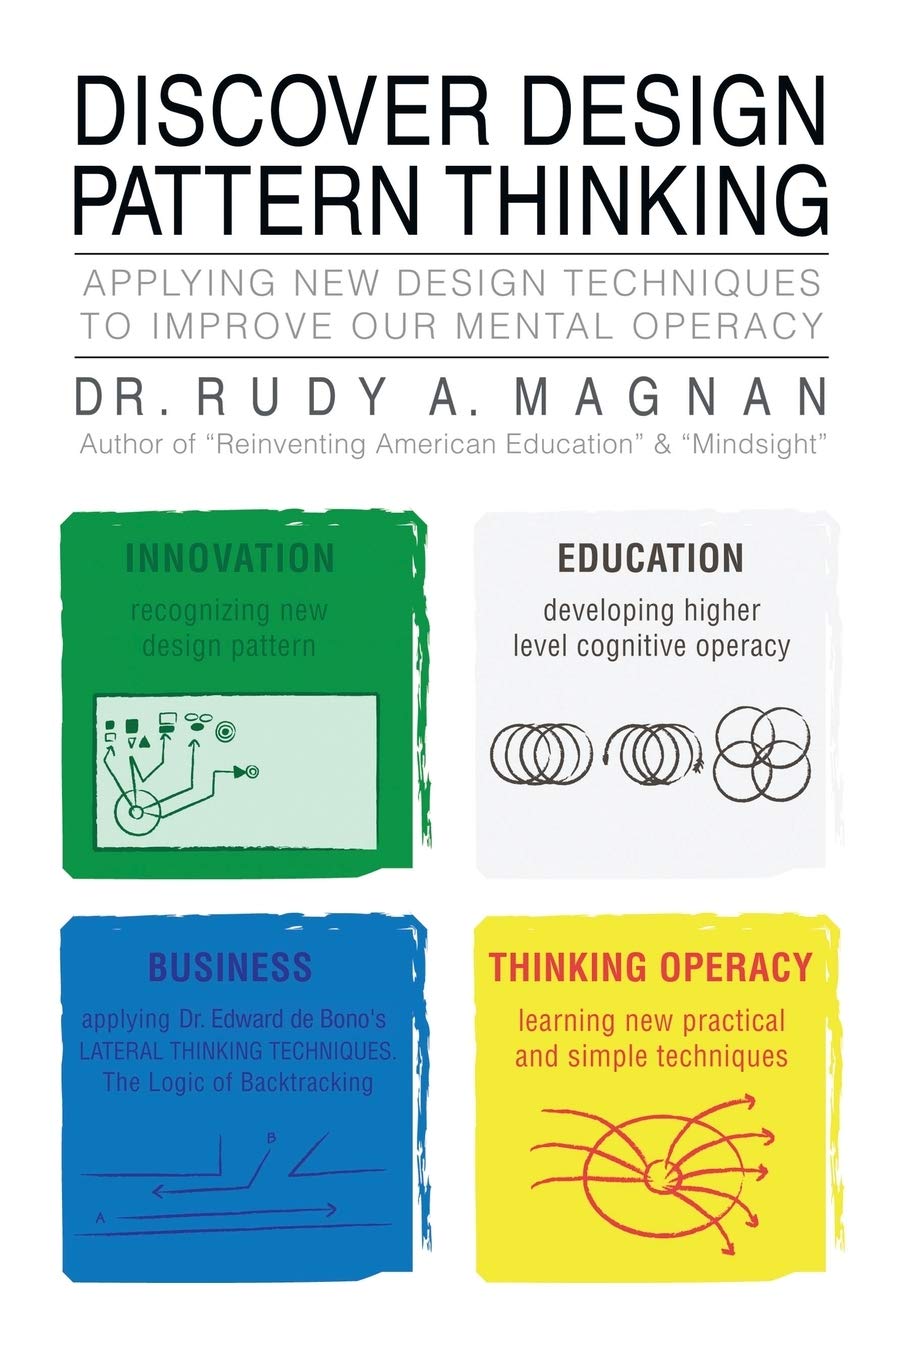 Author's Tranquility Press presents: "Discover Design Pattern Thinking" A Groundbreaking Guide to Developing Productive, Constructive, and Generative Thinking Skills